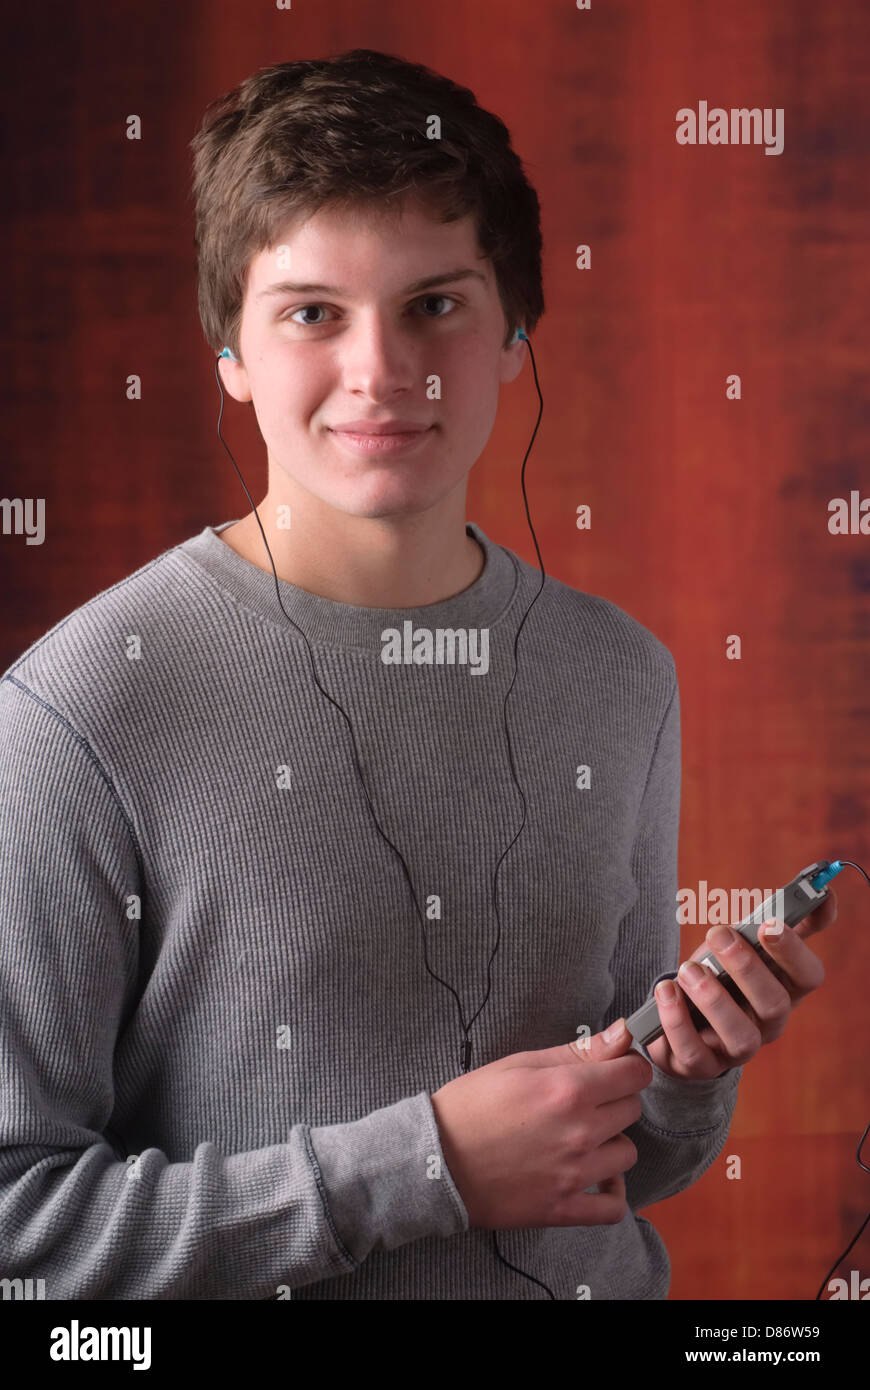 Young male listening to music on an iphone Stock Photo